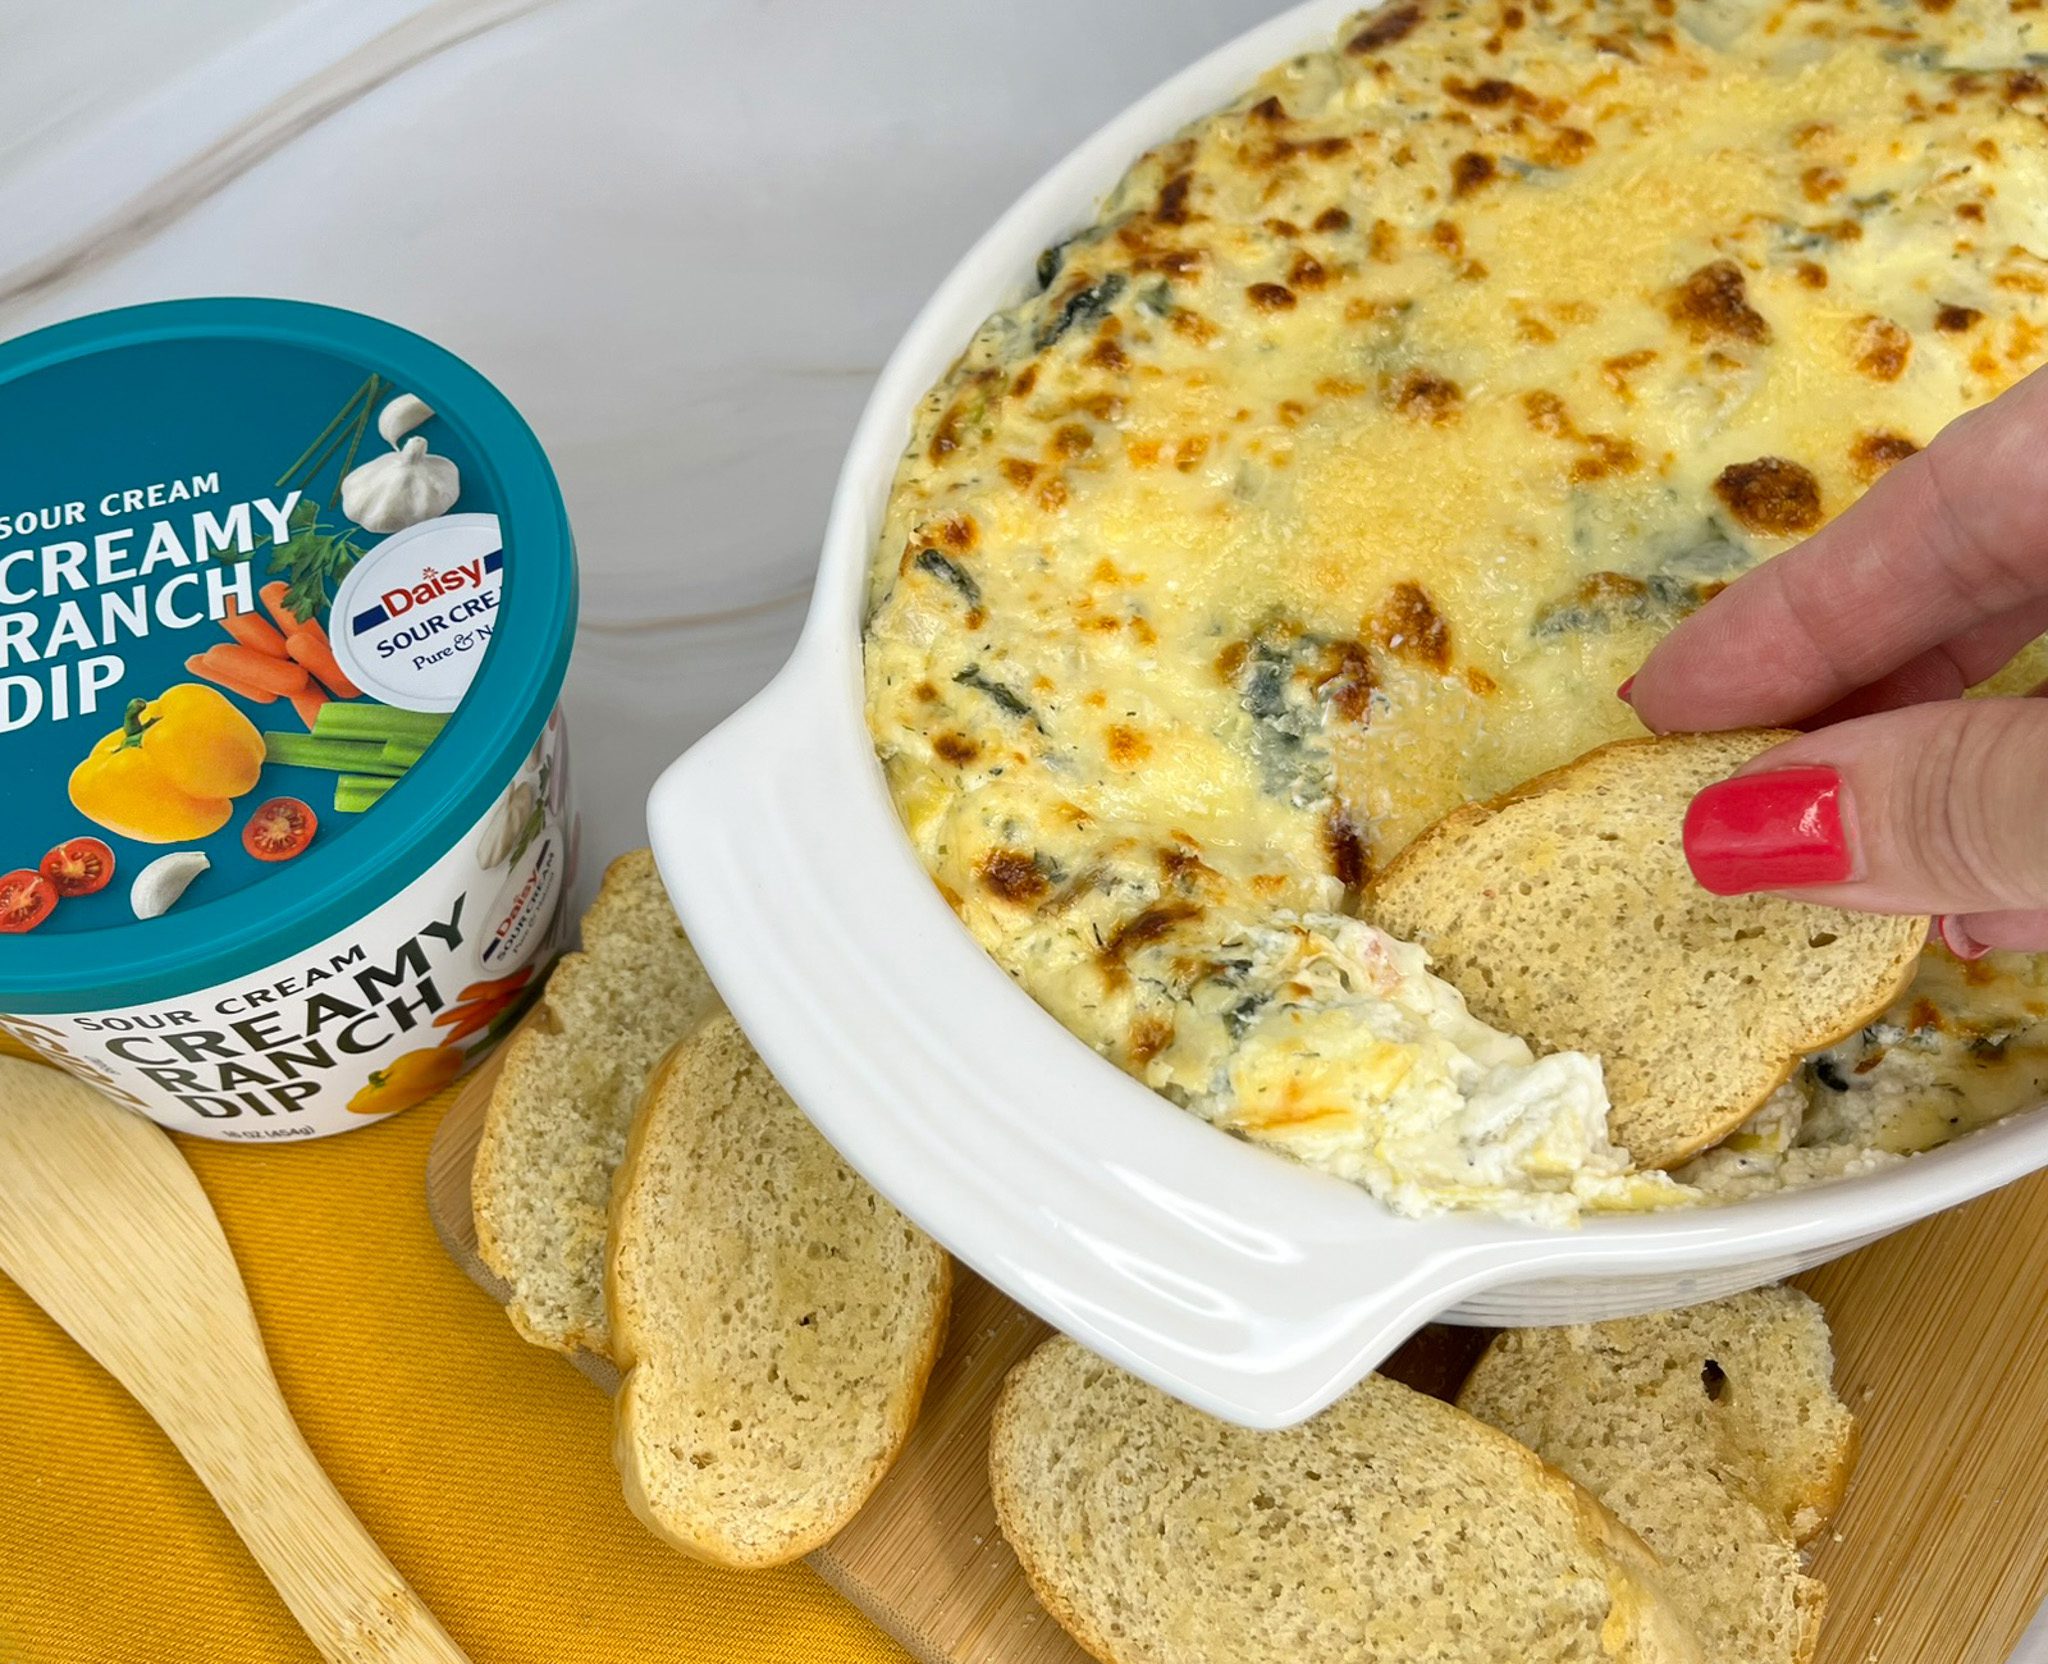 Thumbnail image for Spinach Artichoke Dip